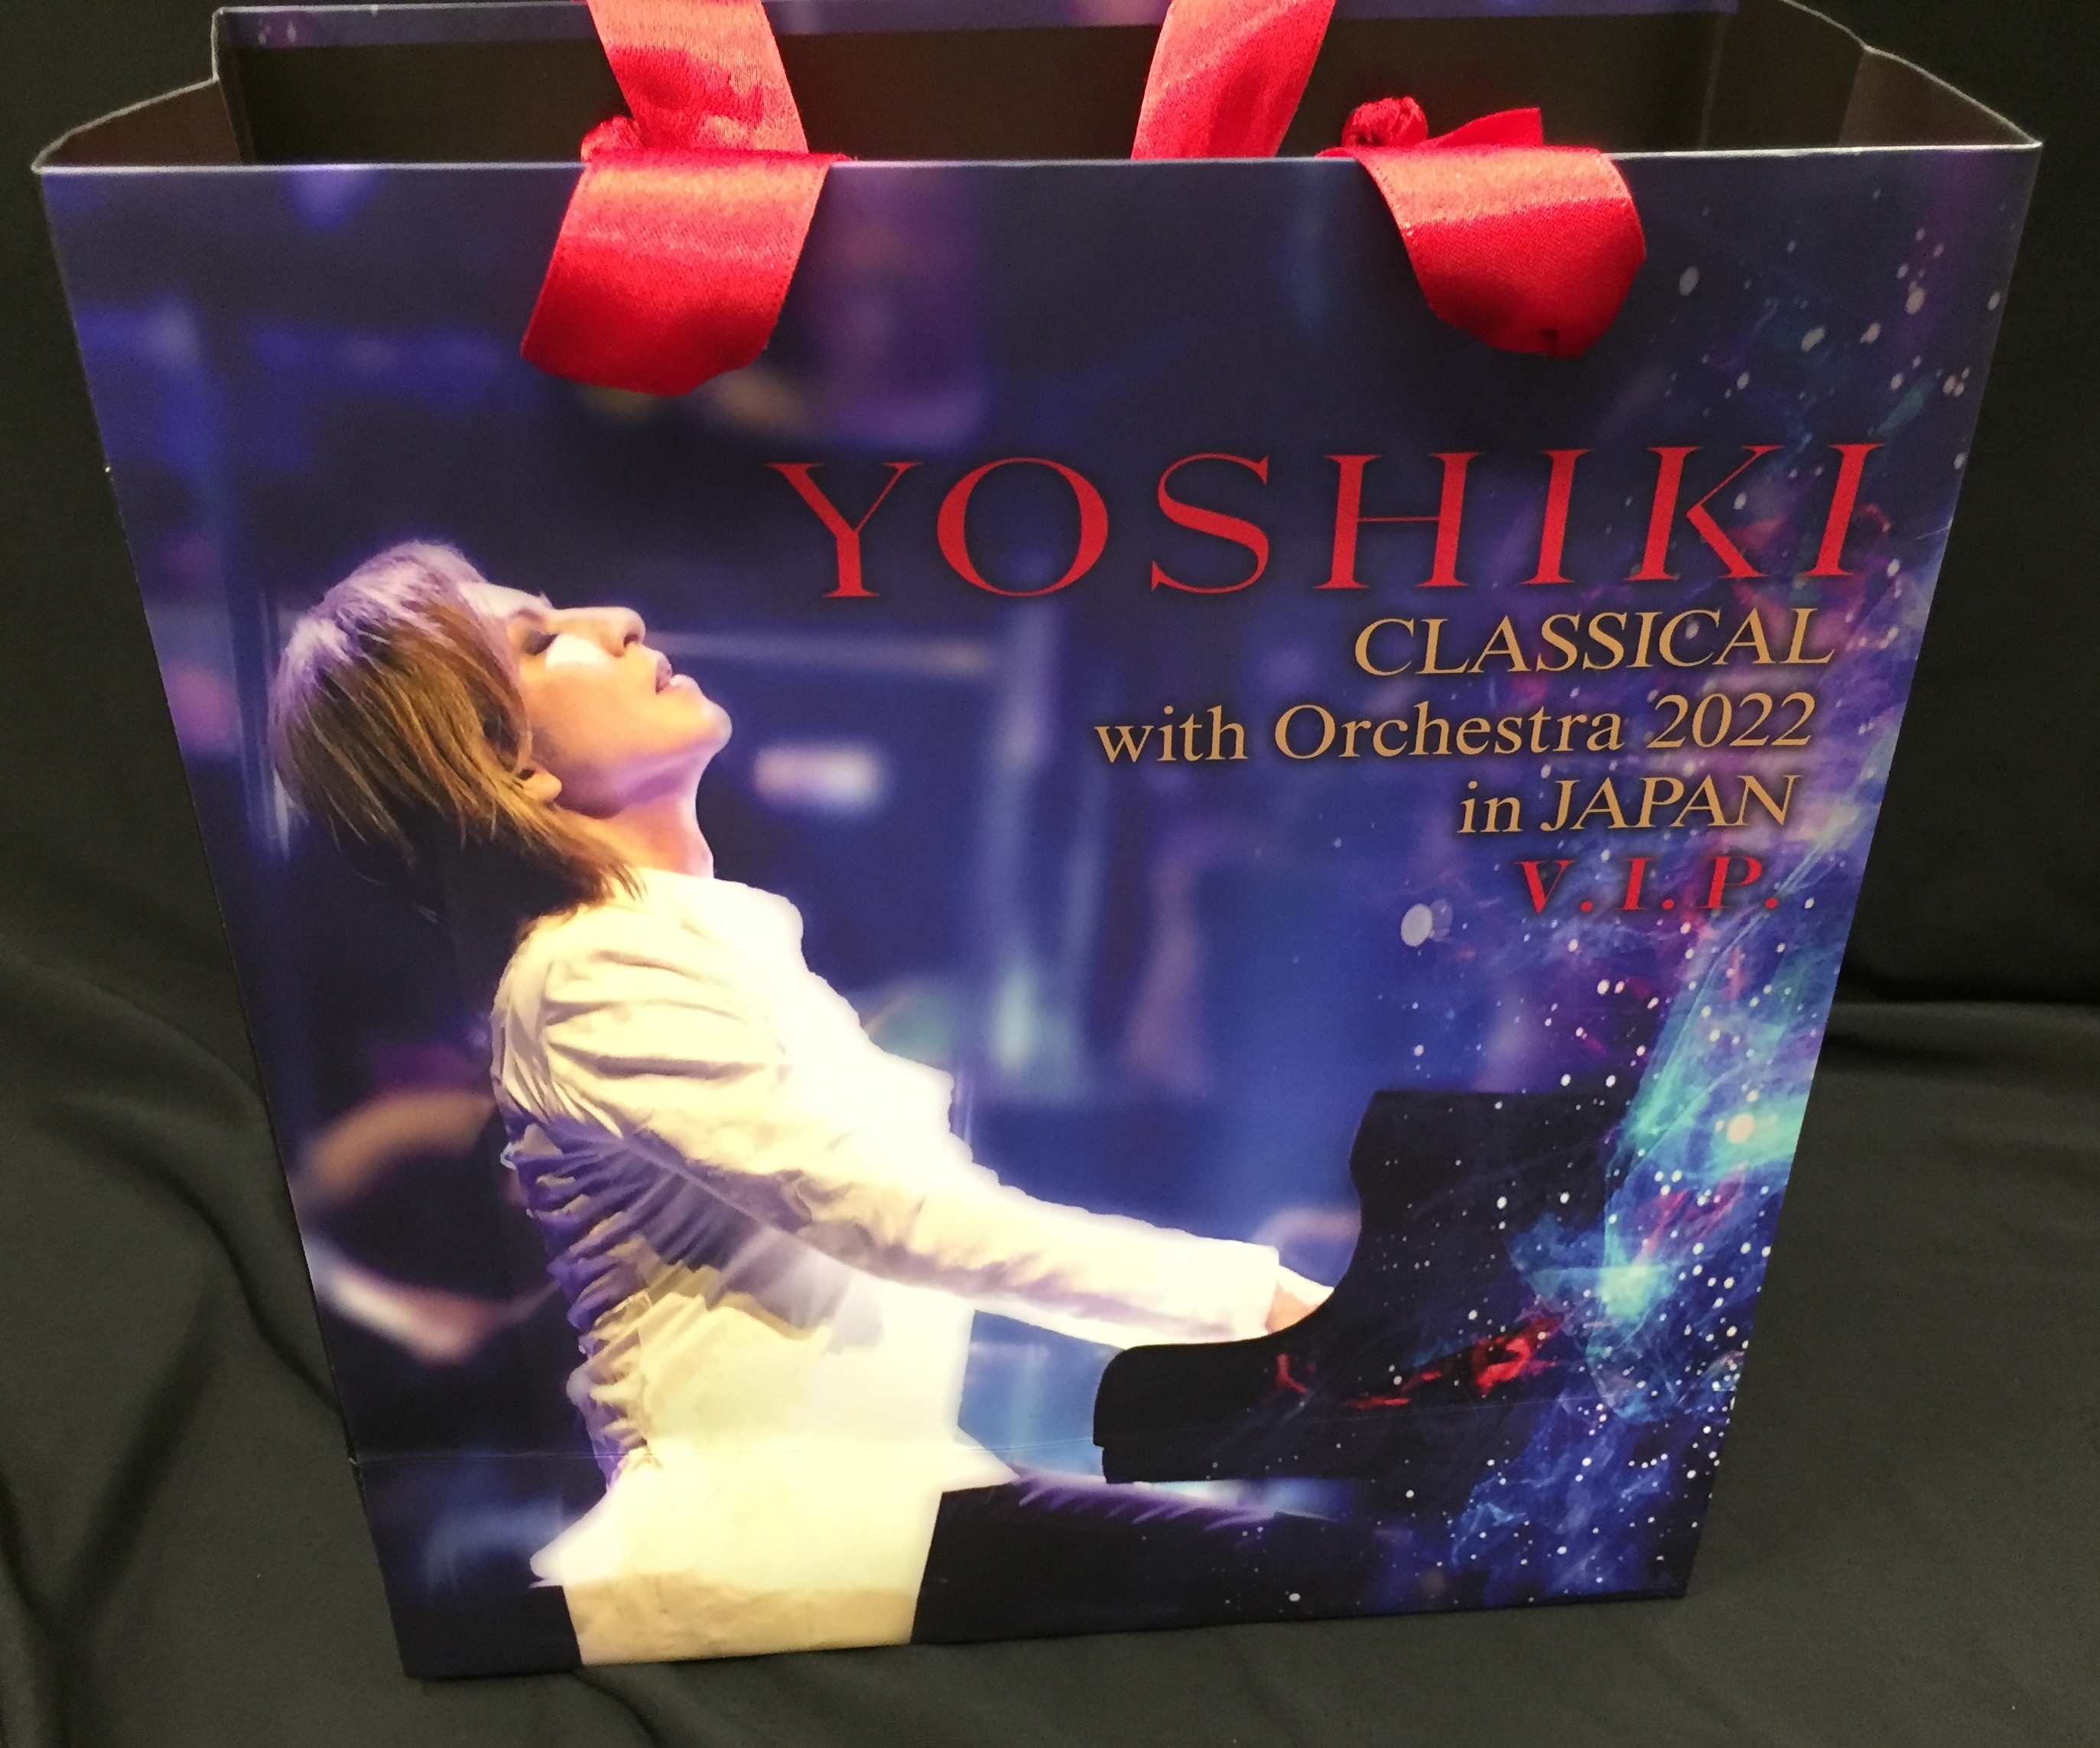 YOSHIKI CLASSICAL with Orcheatra 2022 in JAPAN VIP限定グッズ ...